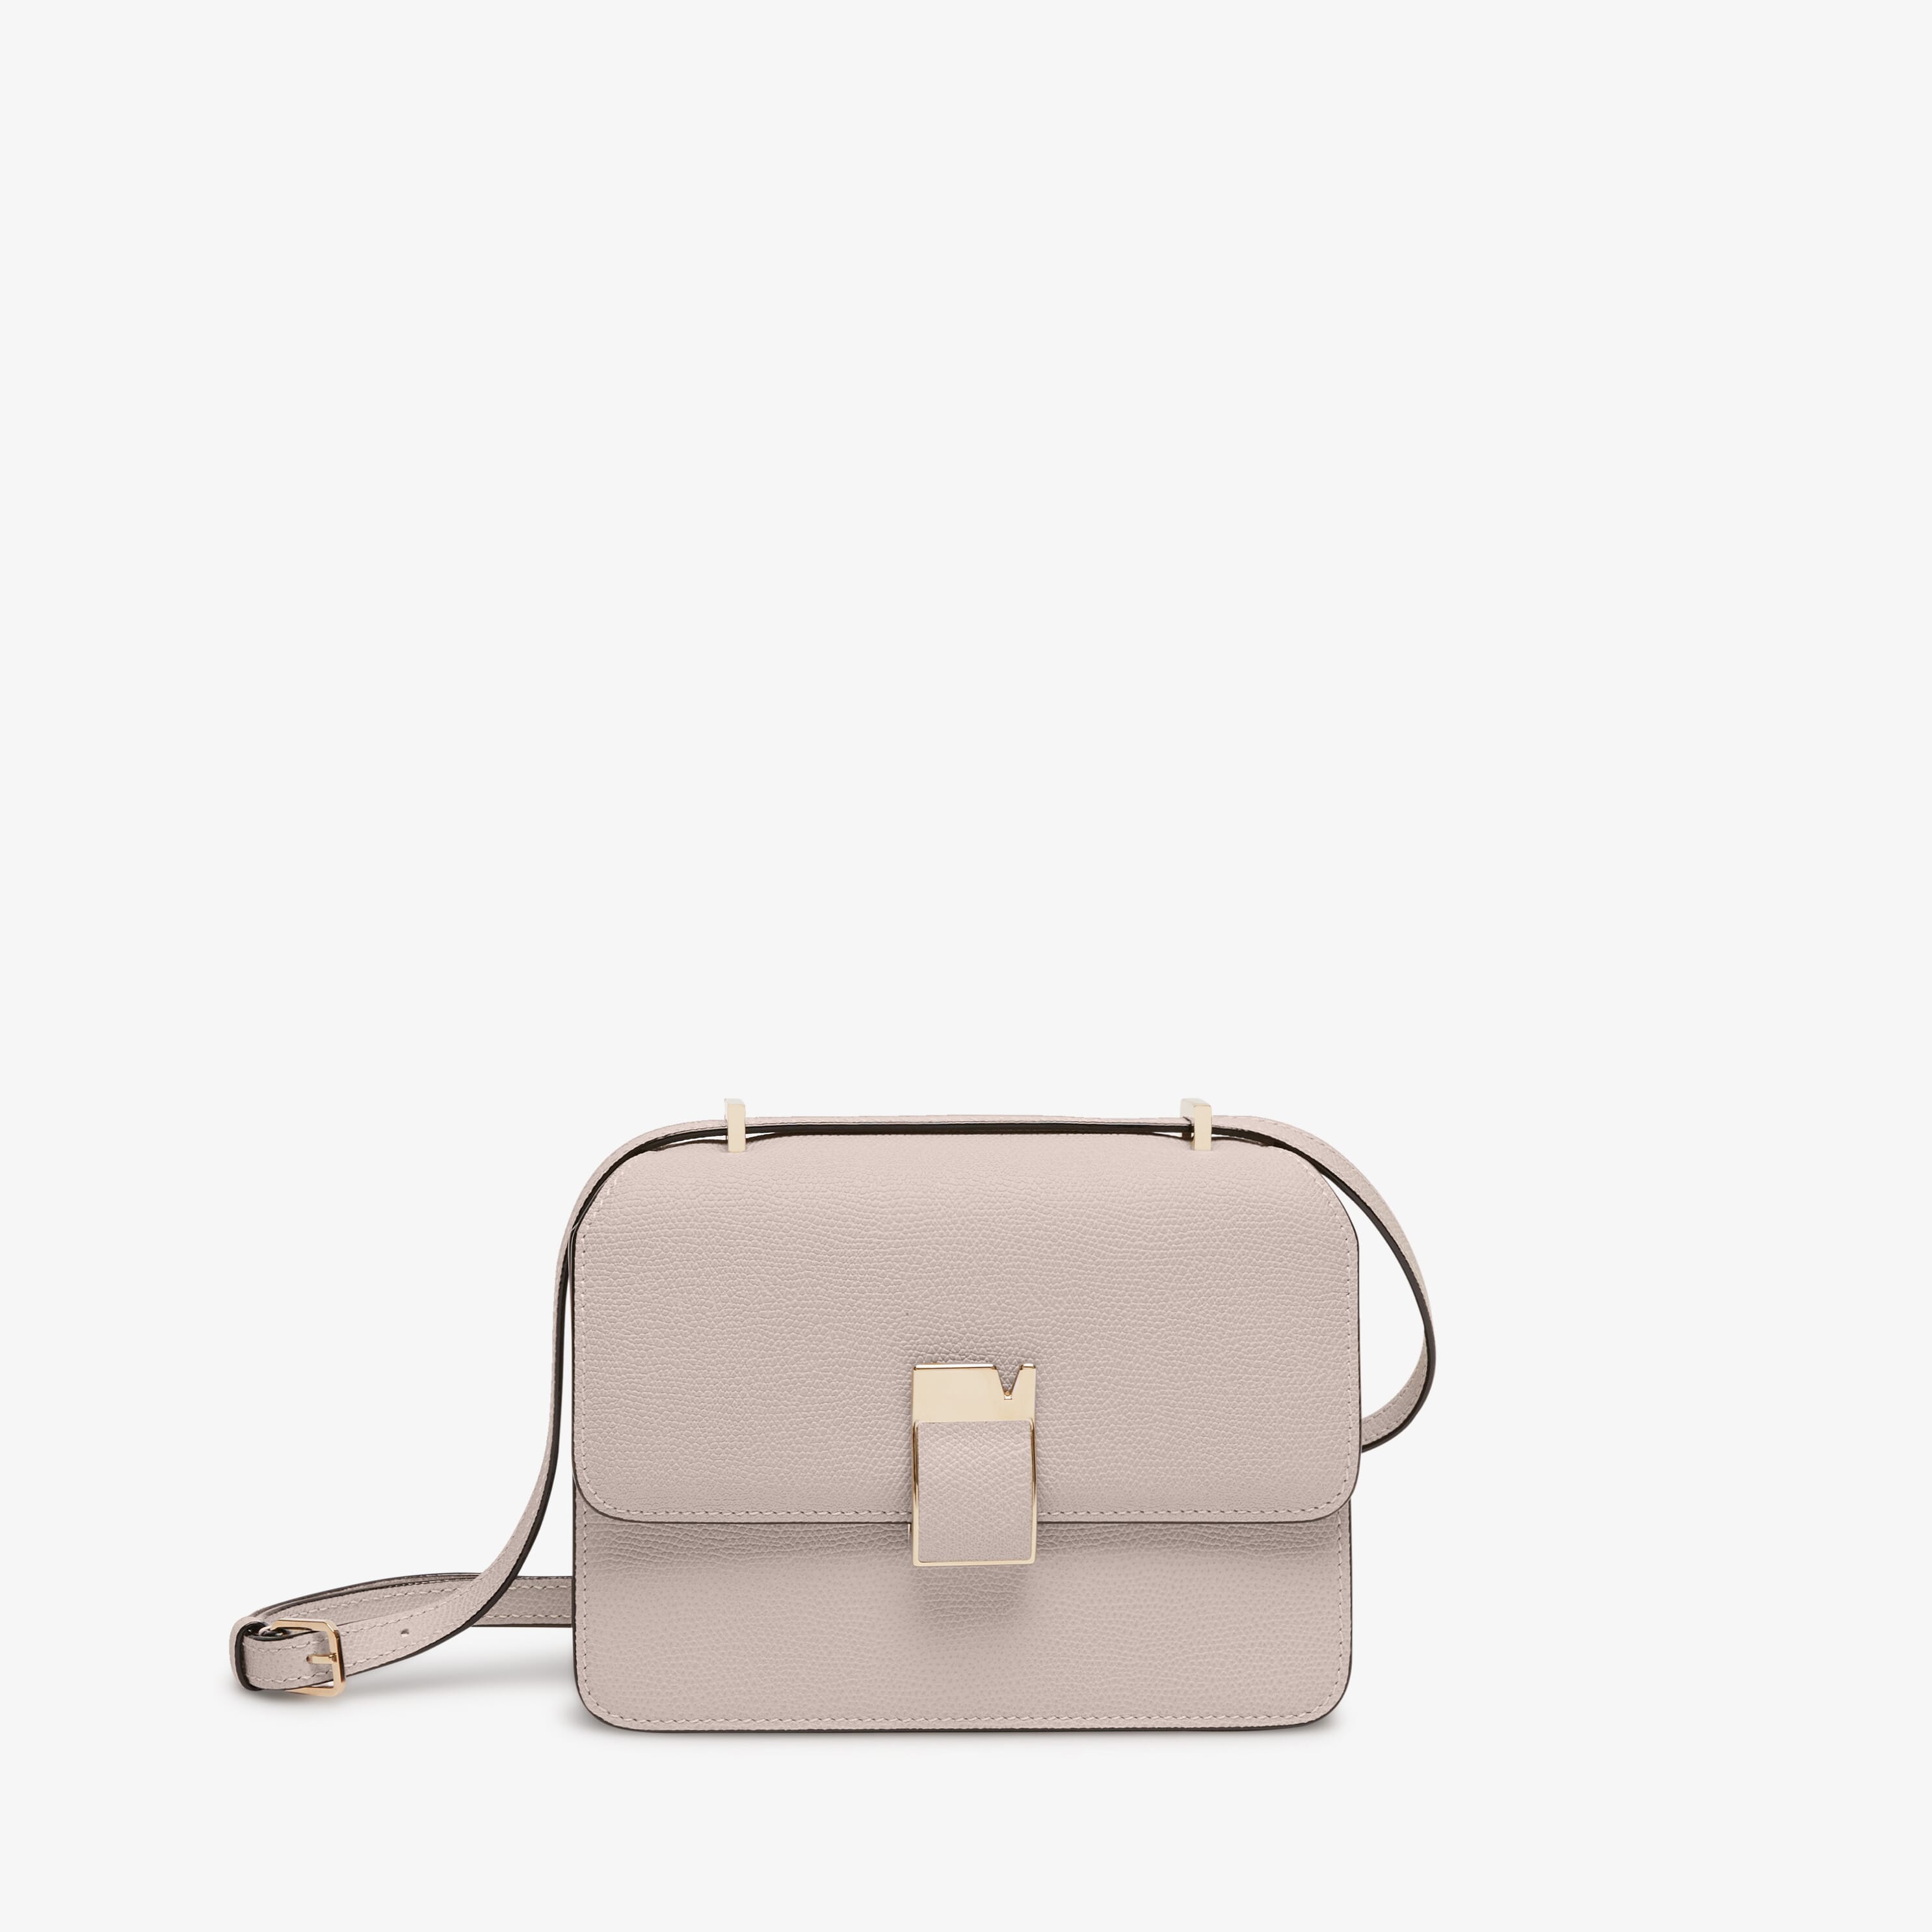 SMALL HANDBAG NOLO WITH FLAP CALF LEATHER VS LIGHT GOLD,PD,large